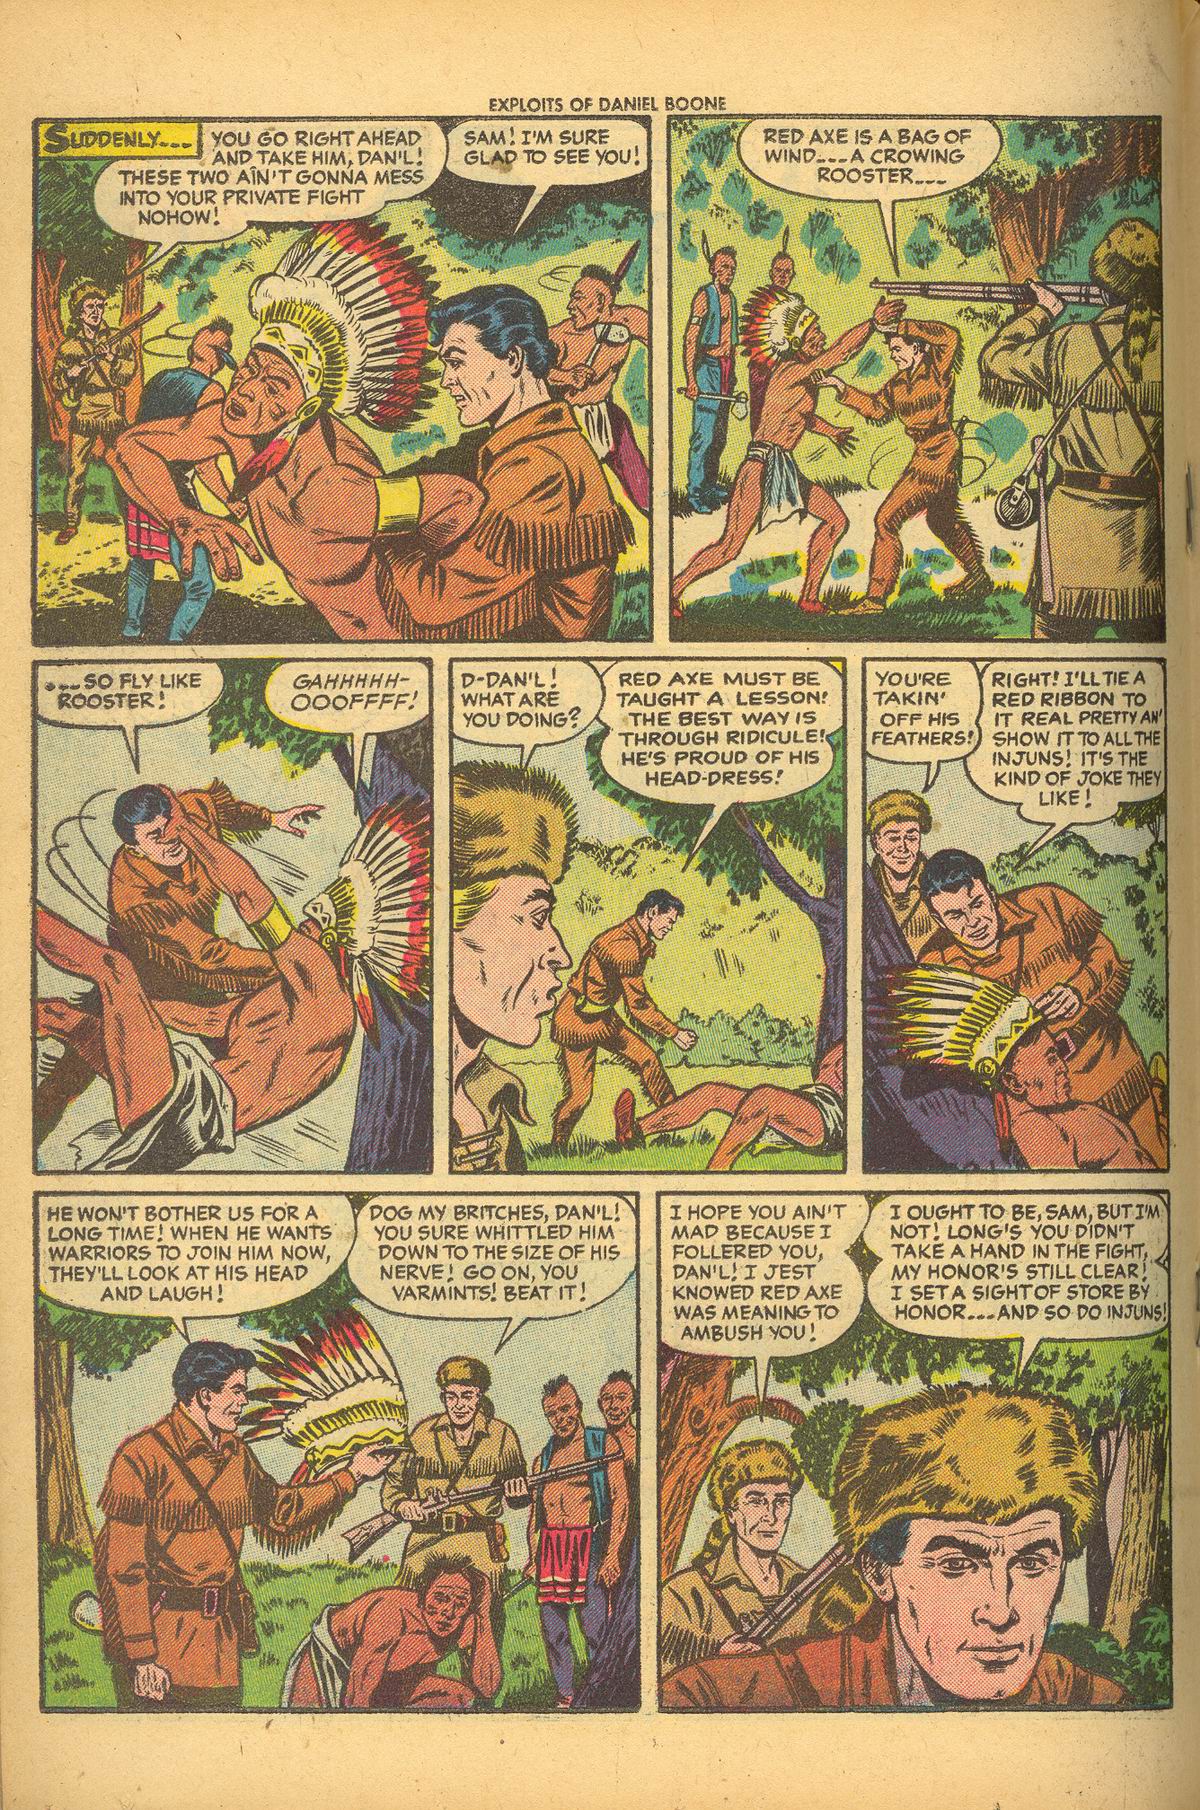 Read online Exploits of Daniel Boone comic -  Issue #2 - 18